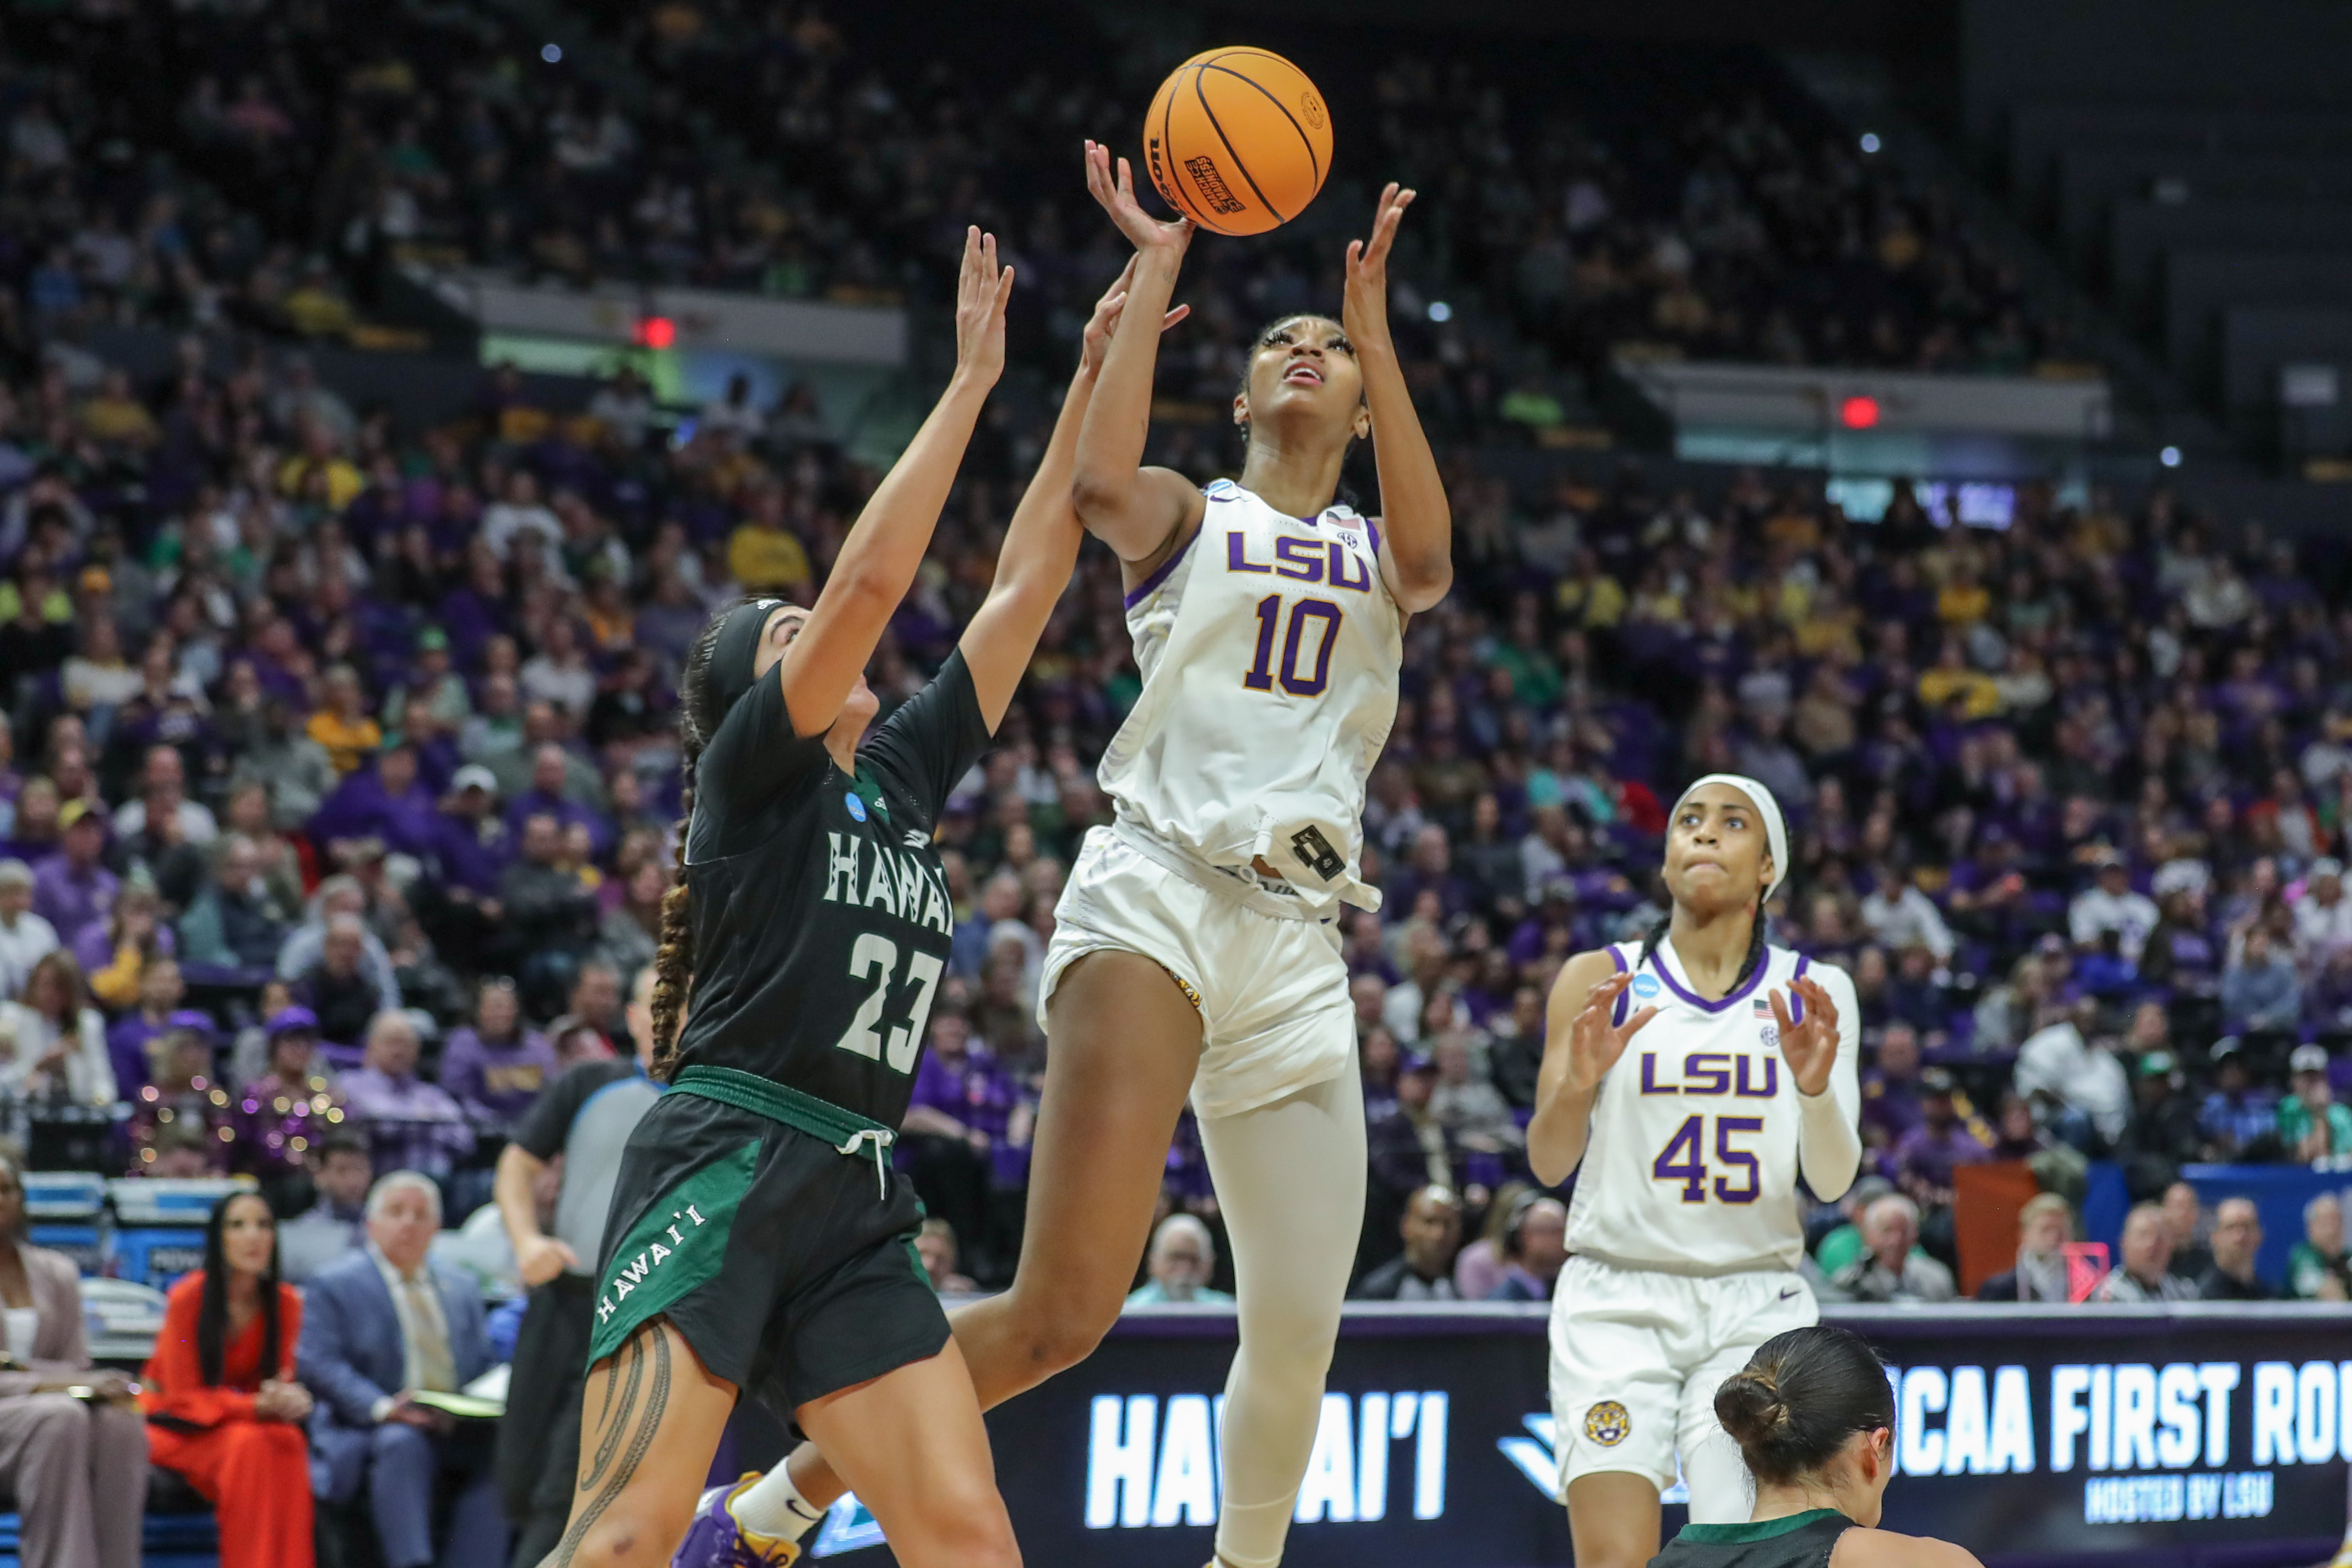 ‘Survive and Advance’ Angel Reese puts No. 3 seed LSU on her back with